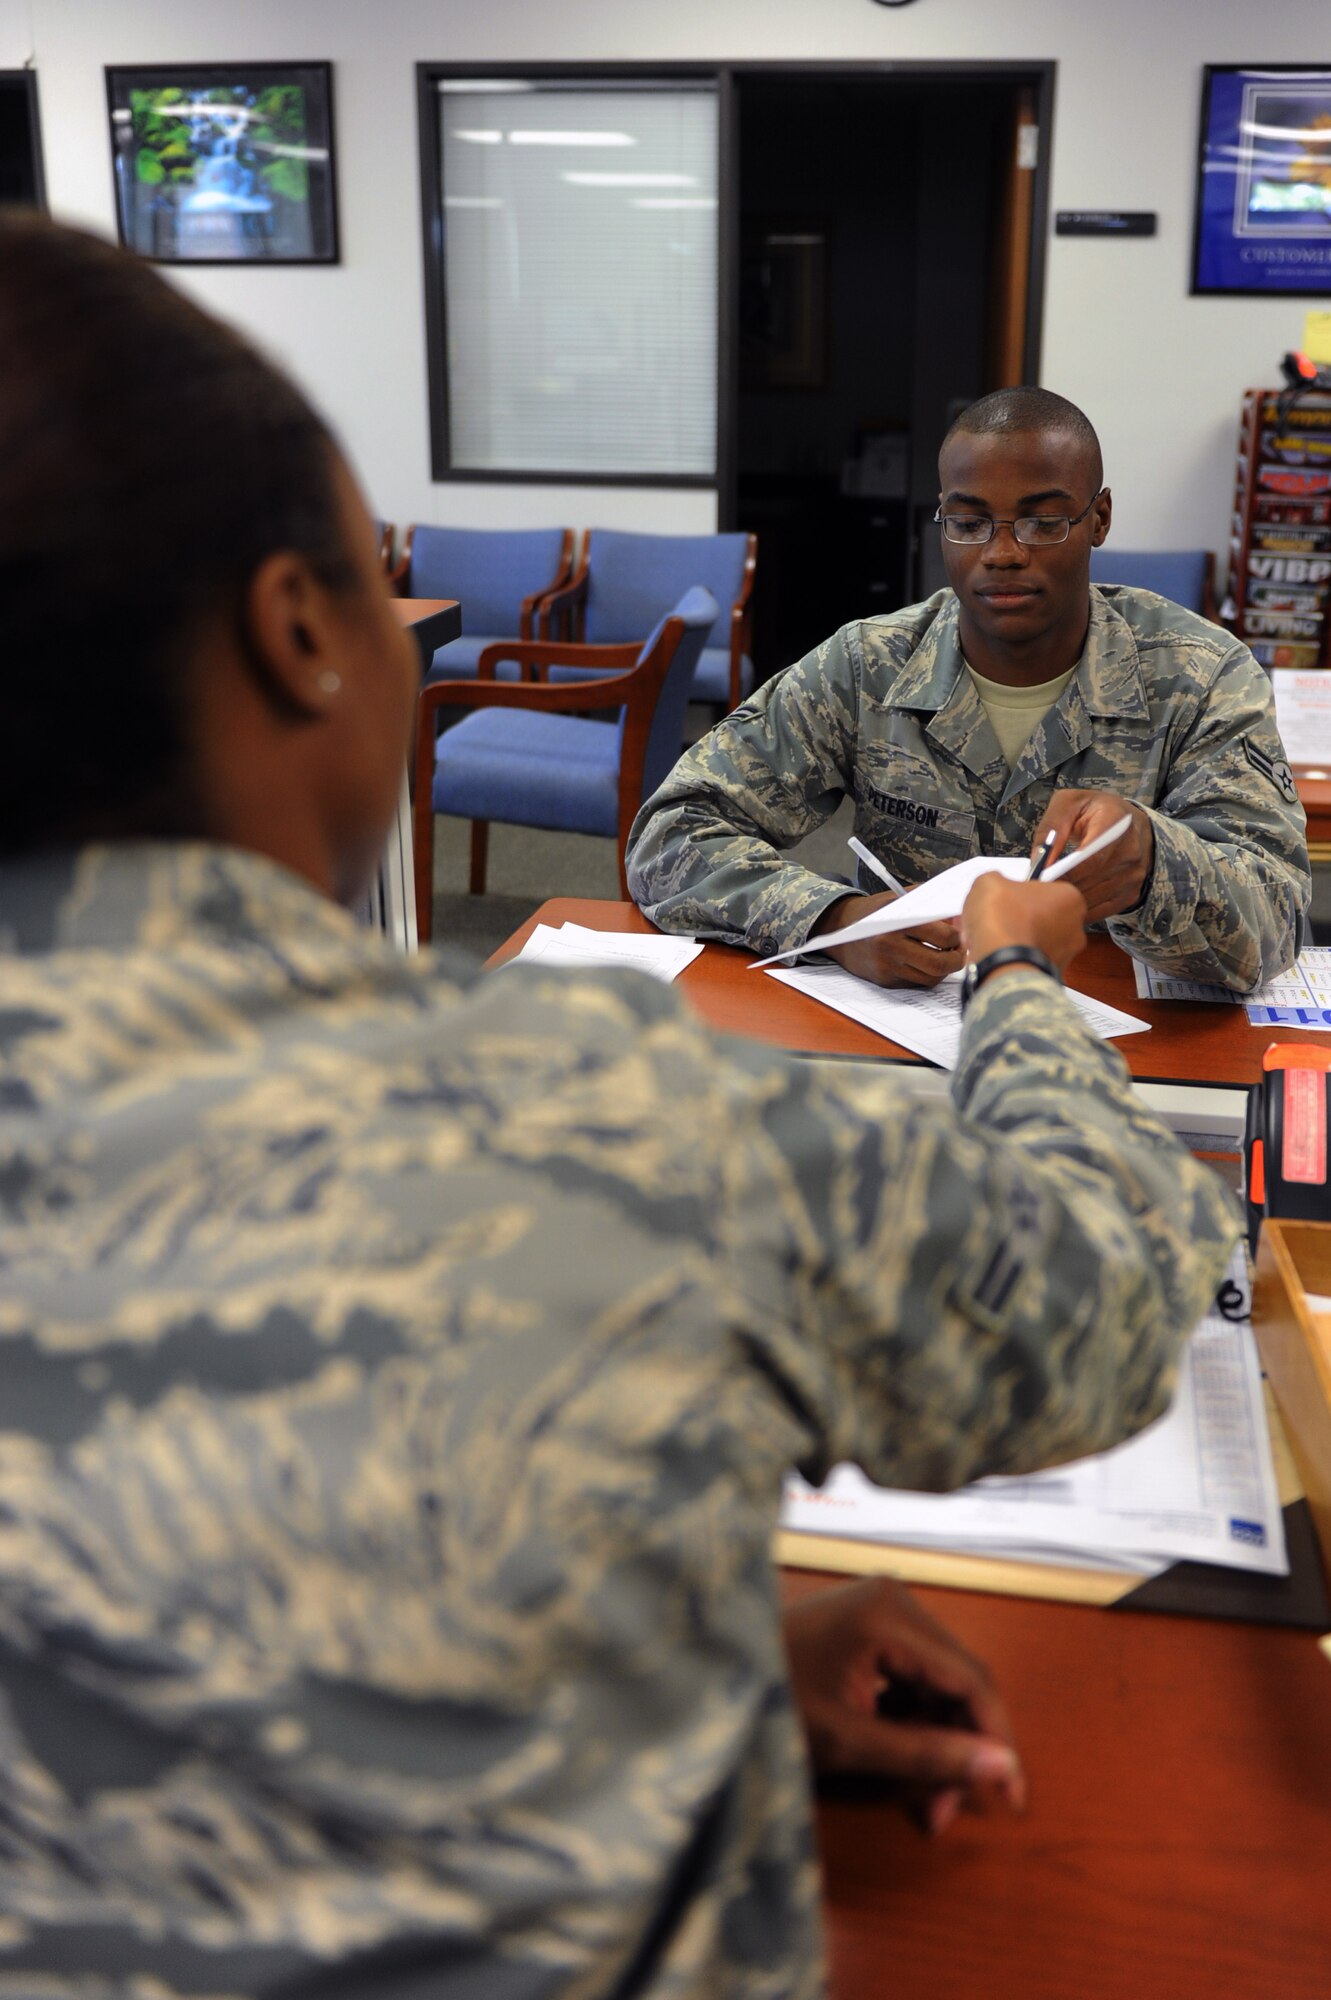 Airman 1st Class Brent Peterson, a 373rd Training Squadron trainee receives an application for shipment/storage of personal property from Airman 1st Class De’Andra Simmons, a 19th Logistics Readiness Squadron traffic management apprentice Aug. 29, 2011, at Little Rock Air Force Base, Ark. The TMO office is located in room 104 in building 1255. Office hours are 8 a.m. to 4 p.m. The office is closed on Thursdays for training from 8 a.m. to 9 a.m. (U.S. Air Force photo by Airman 1st Class Rusty Frank) 